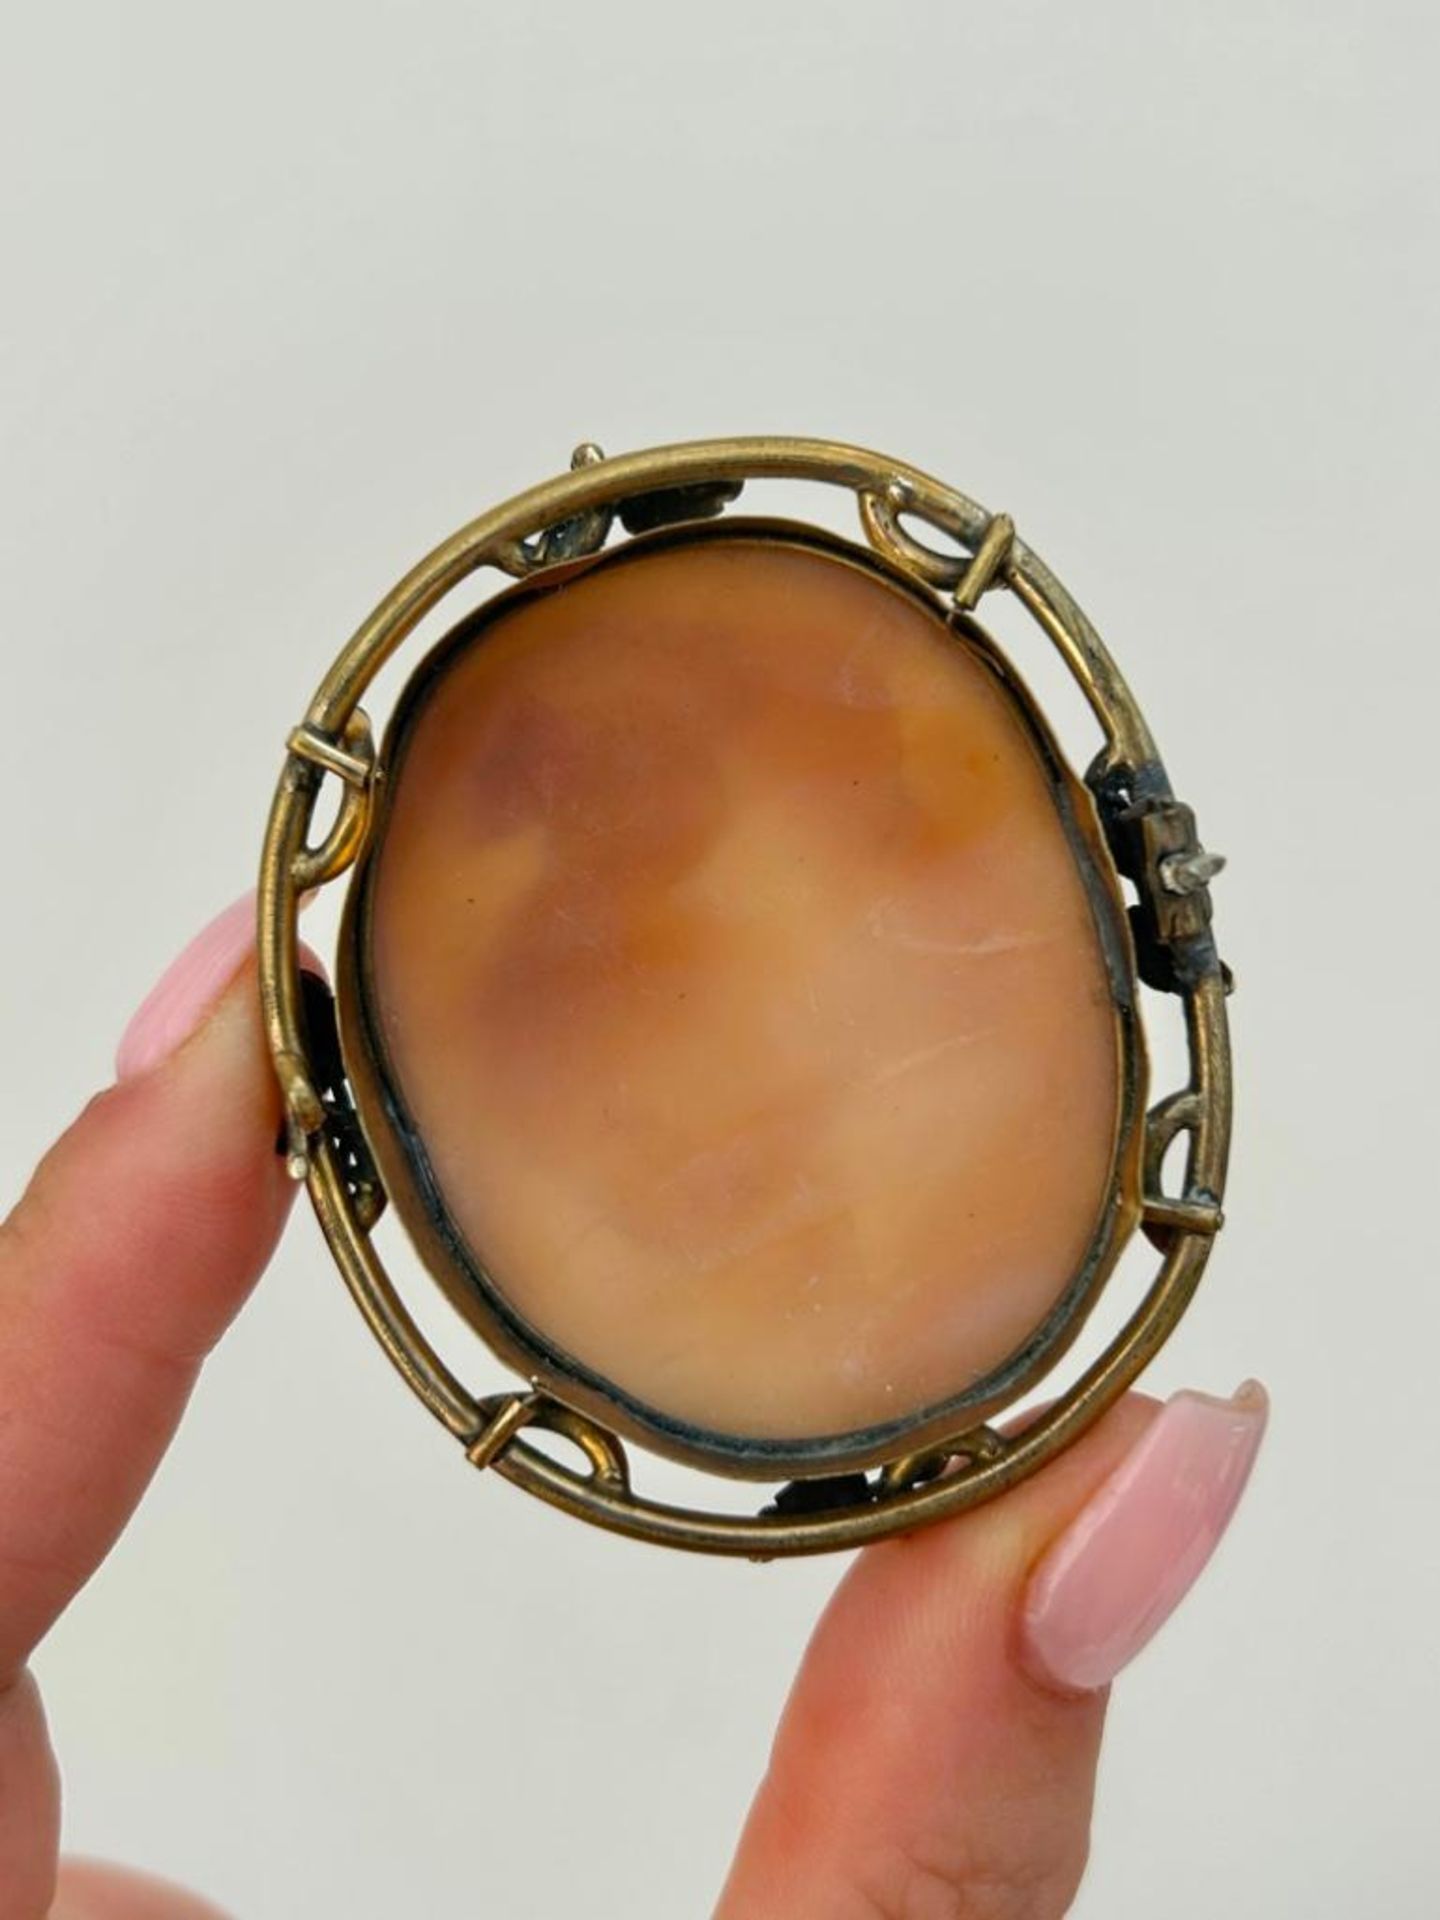 Antique Large Cameo Brooch - Image 3 of 3